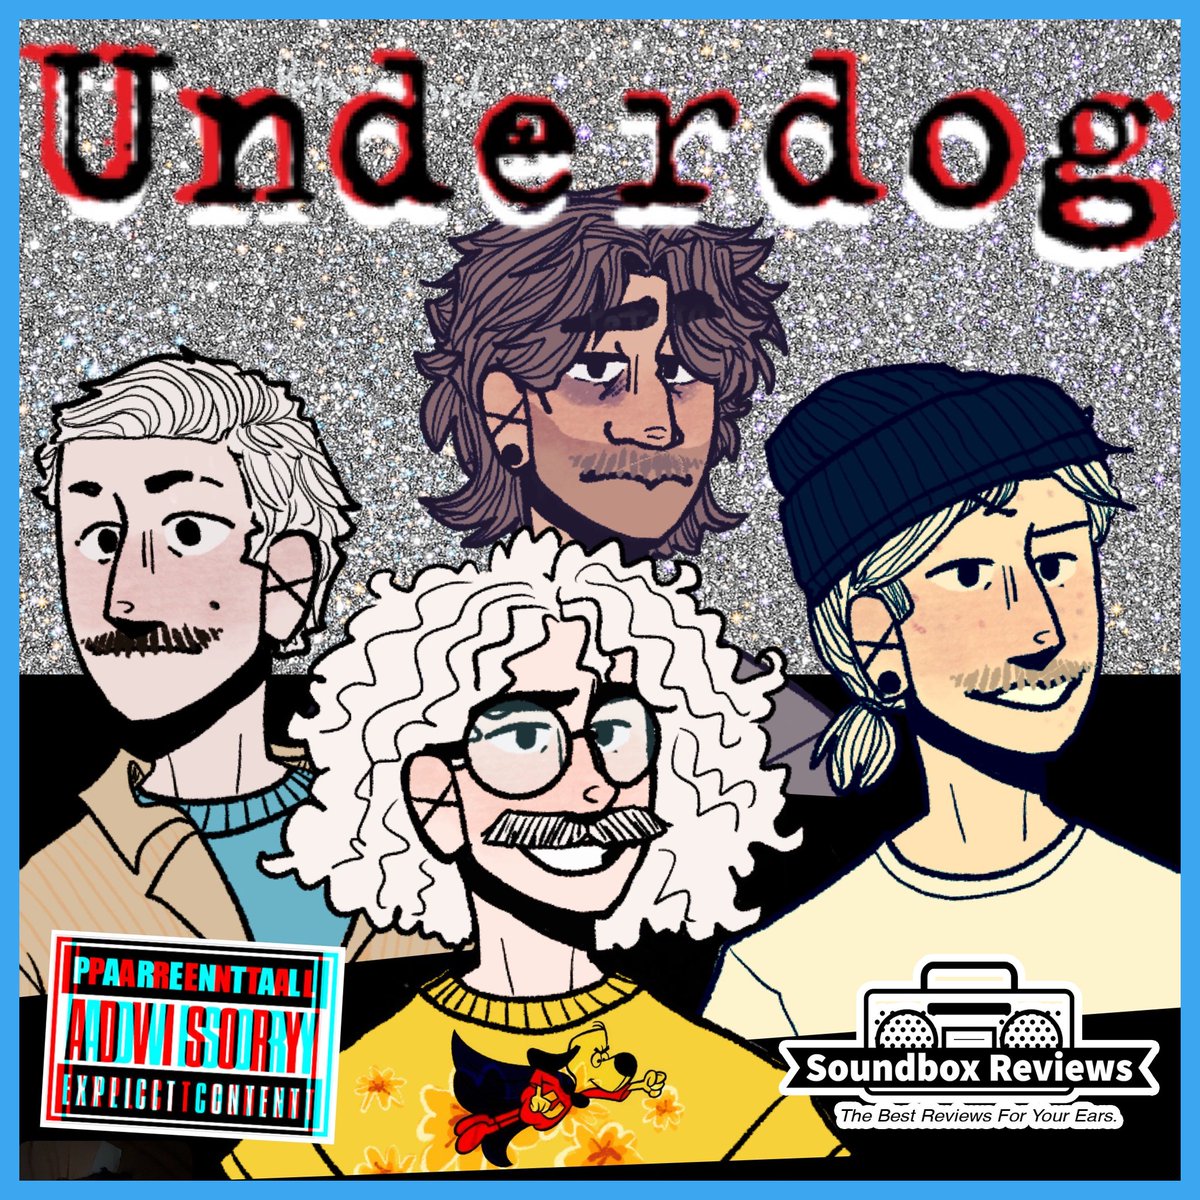 Set your calendar for 9/26! Soundbox Reviews is happy to announce the release of First Effect’s Episode 4 w/ Boston’s Underdog & our next #musicreview on @Underdog_Rocks 1st #album, Ether Dome. While you wait, listen to some music at underdog.rocks! #musicreviewtwitter